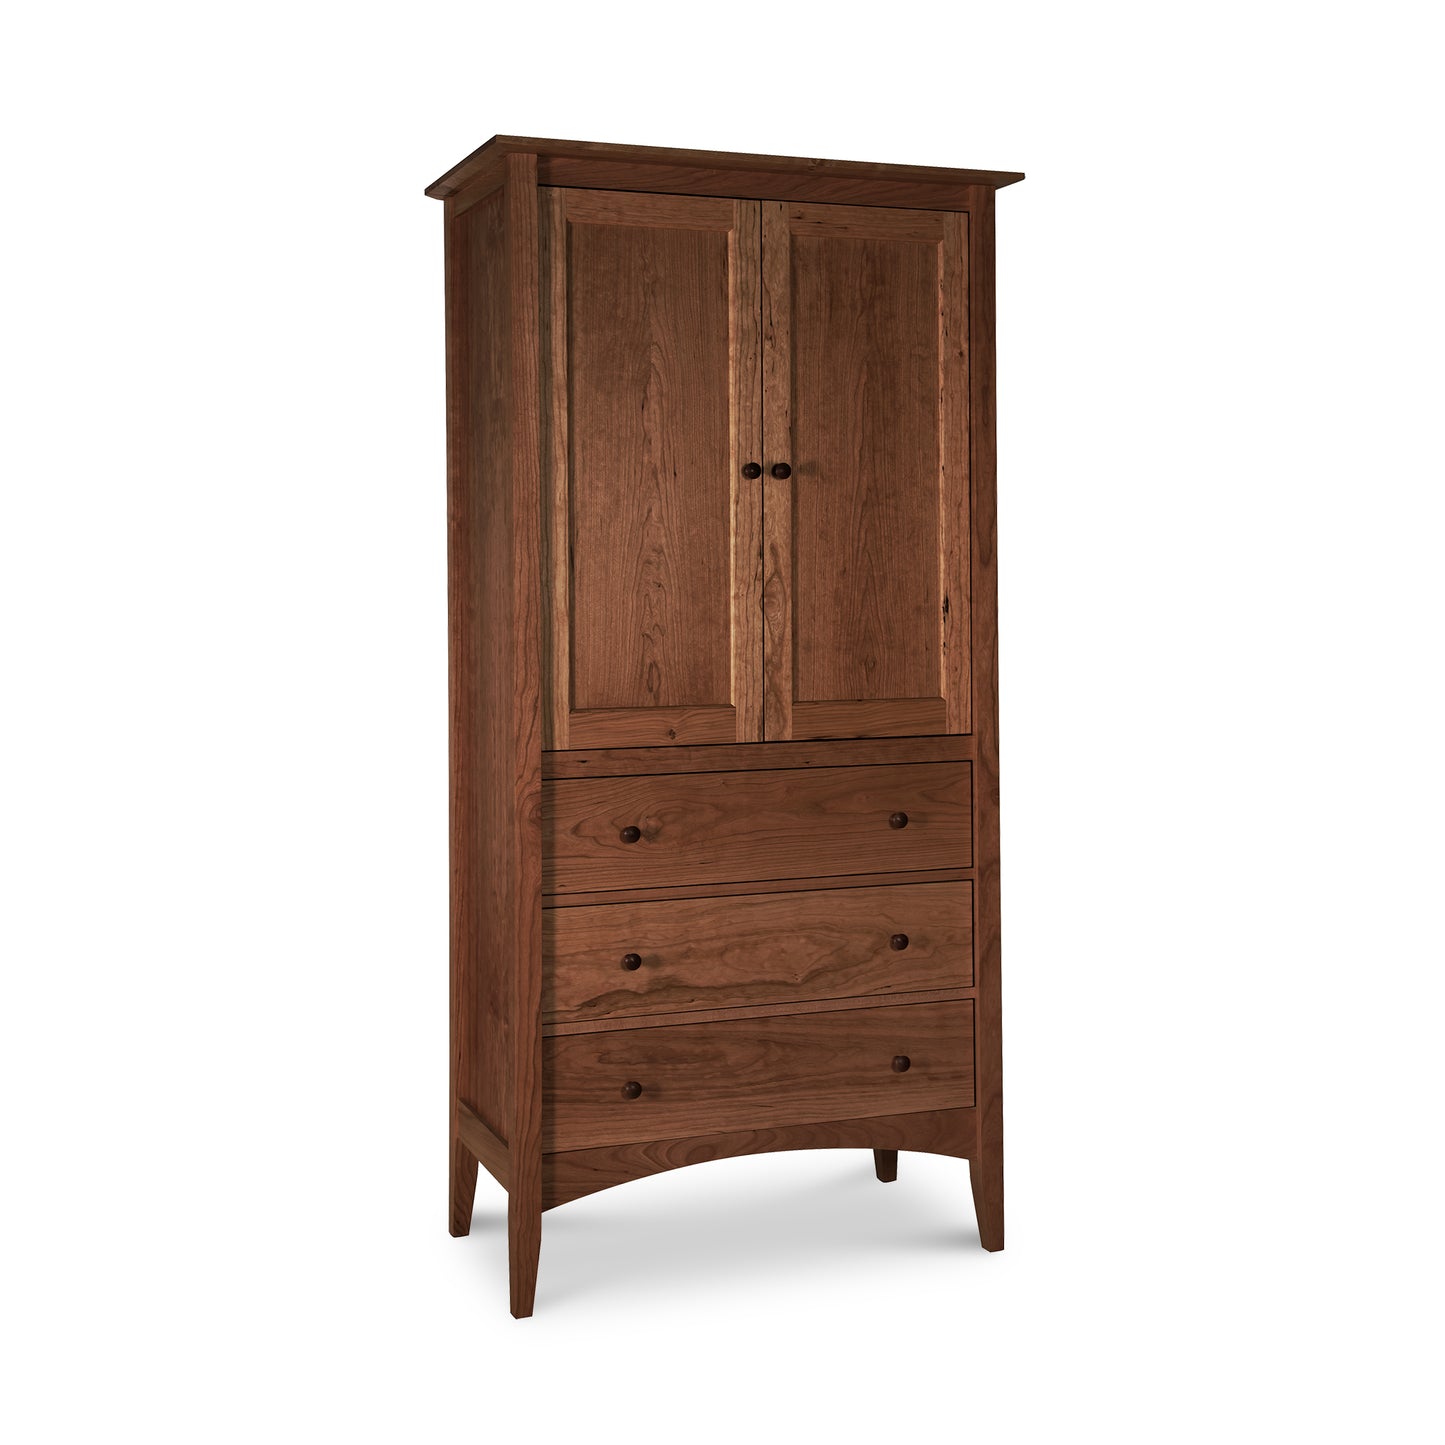 A solid wood Maple Corner Woodworks American Shaker Armoire with two drawers and two doors.